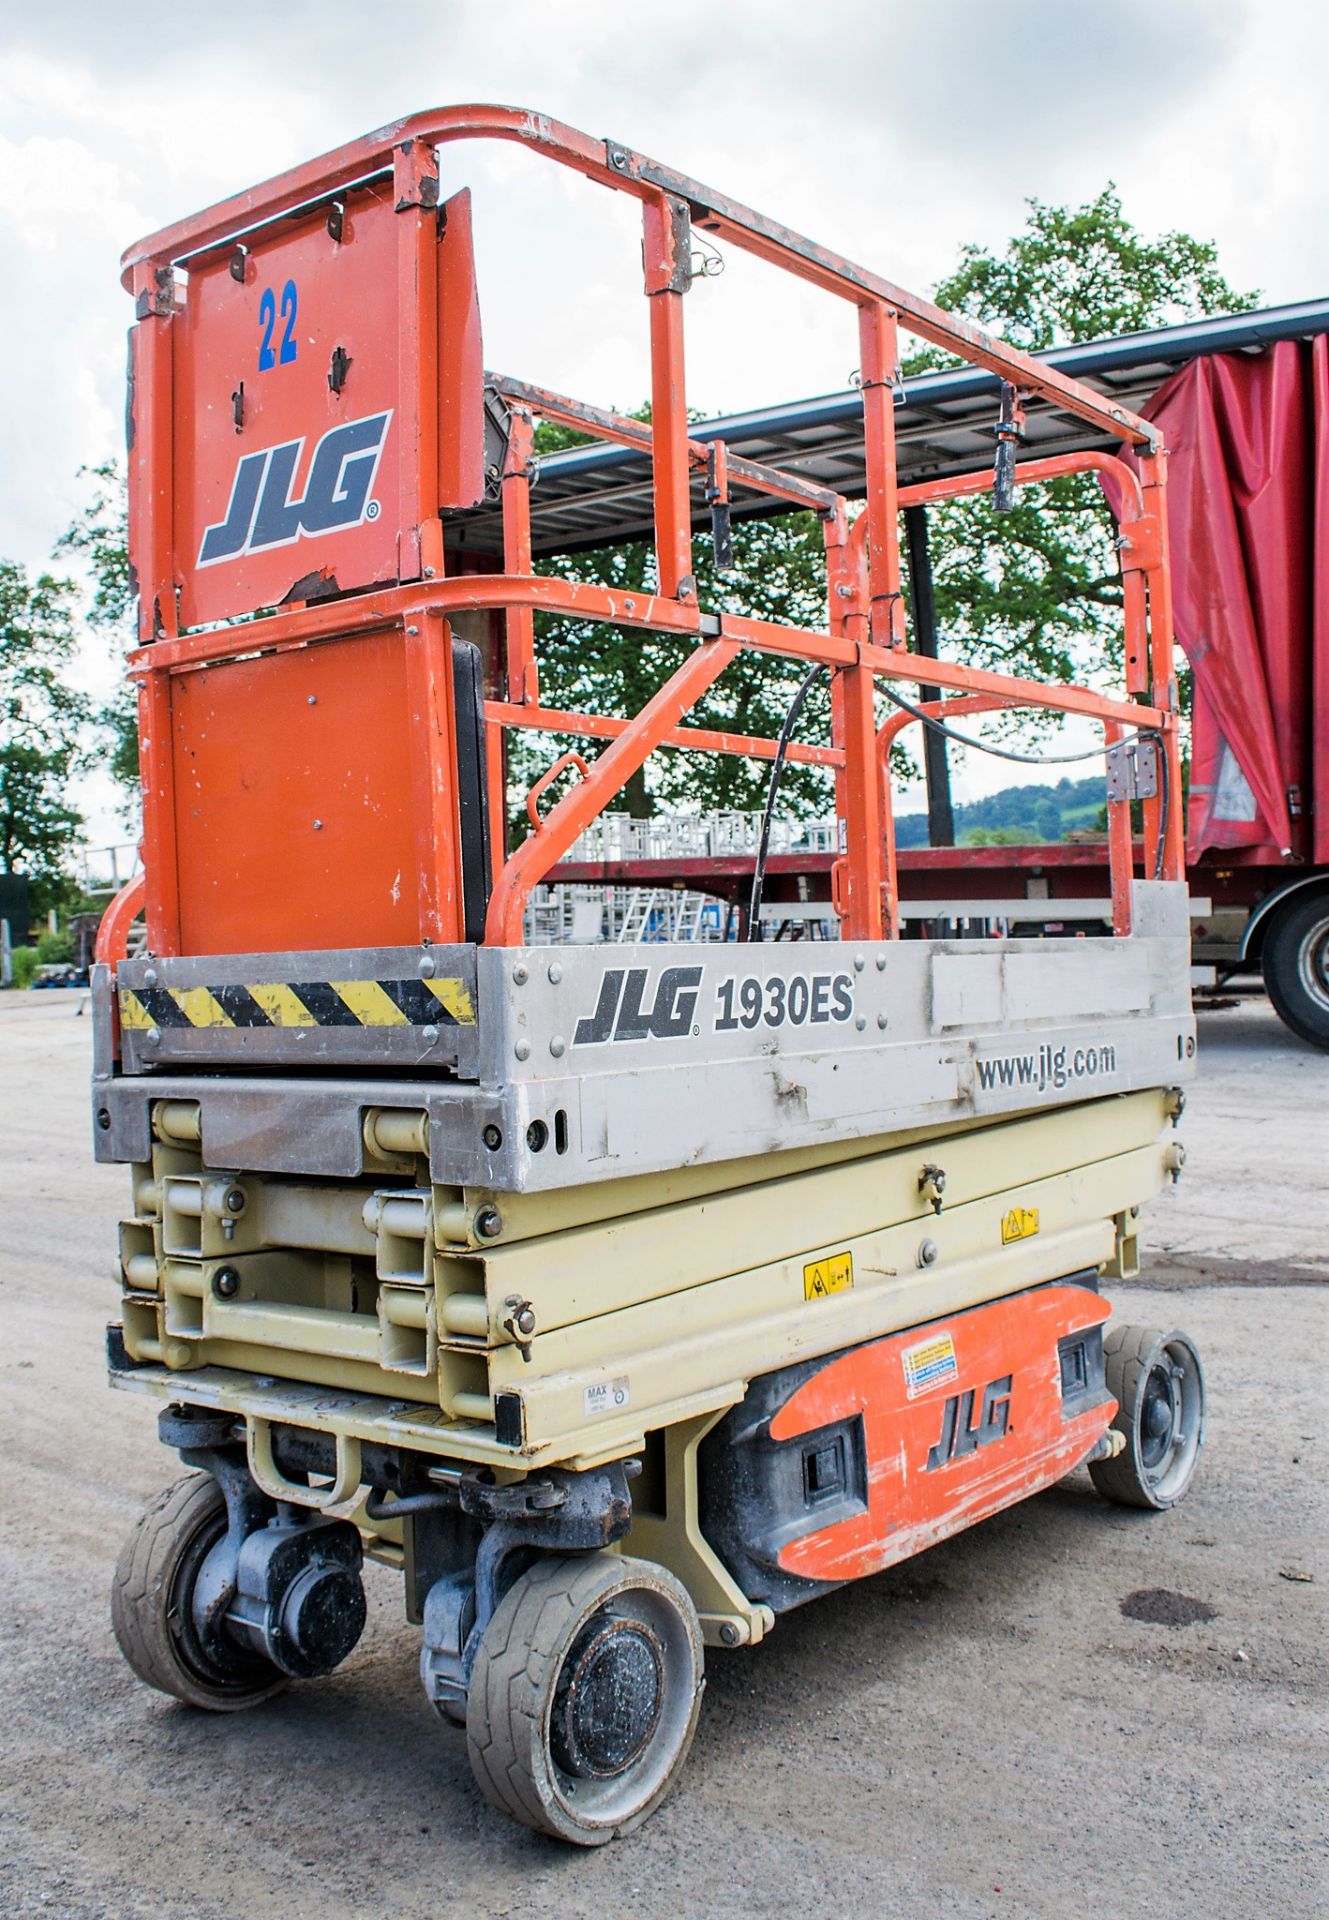 JLG 1930ES 19ft battery electric scissor lift access platform Year: 2004 S/N: 2893 Recorded hours: